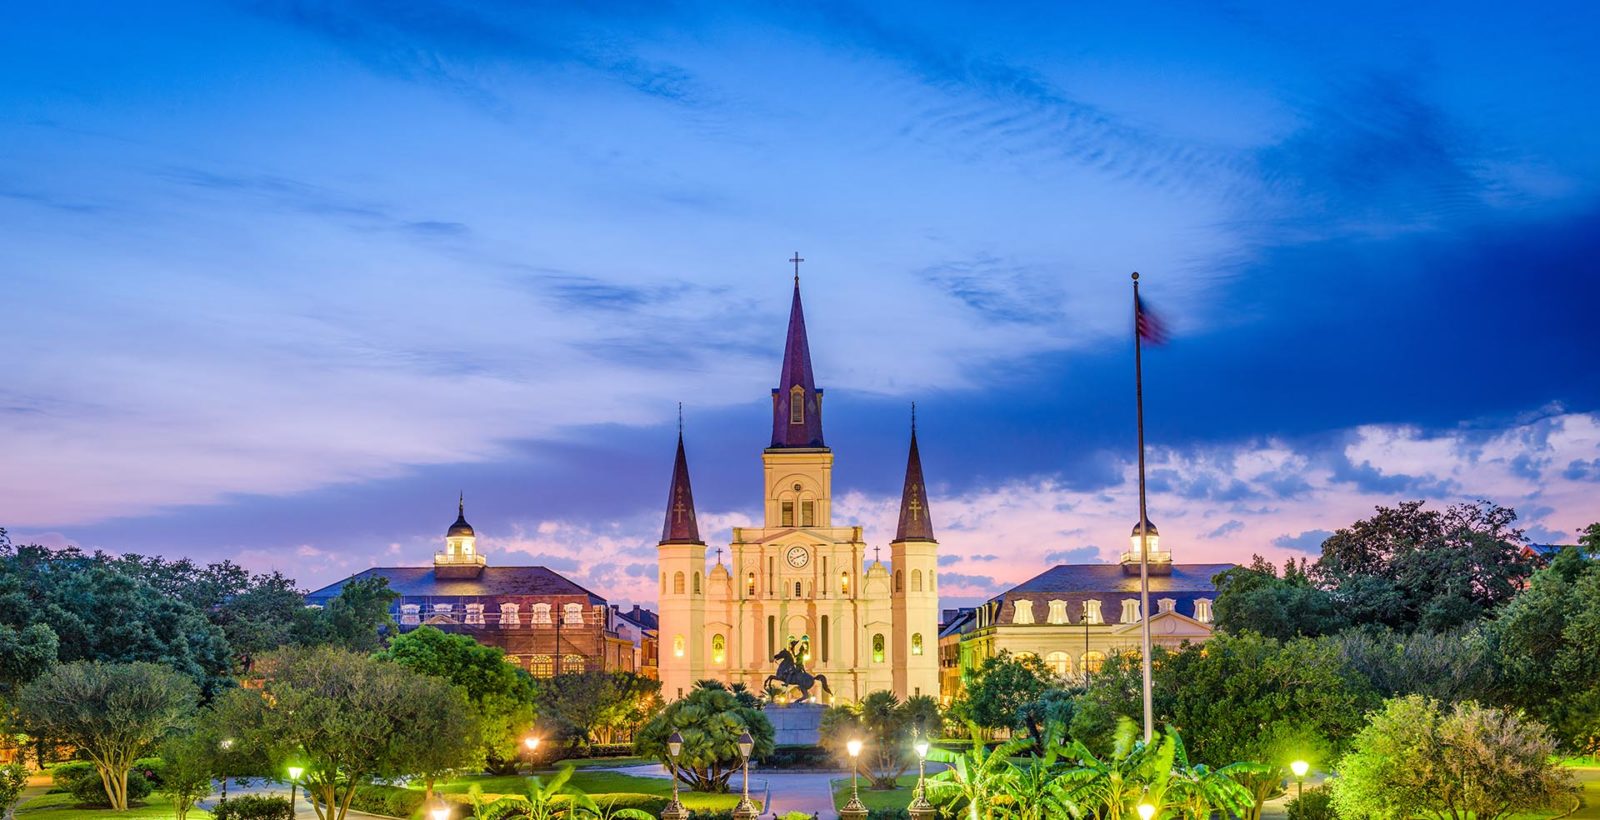 St. Louis Cathedral and Jackson Square at night